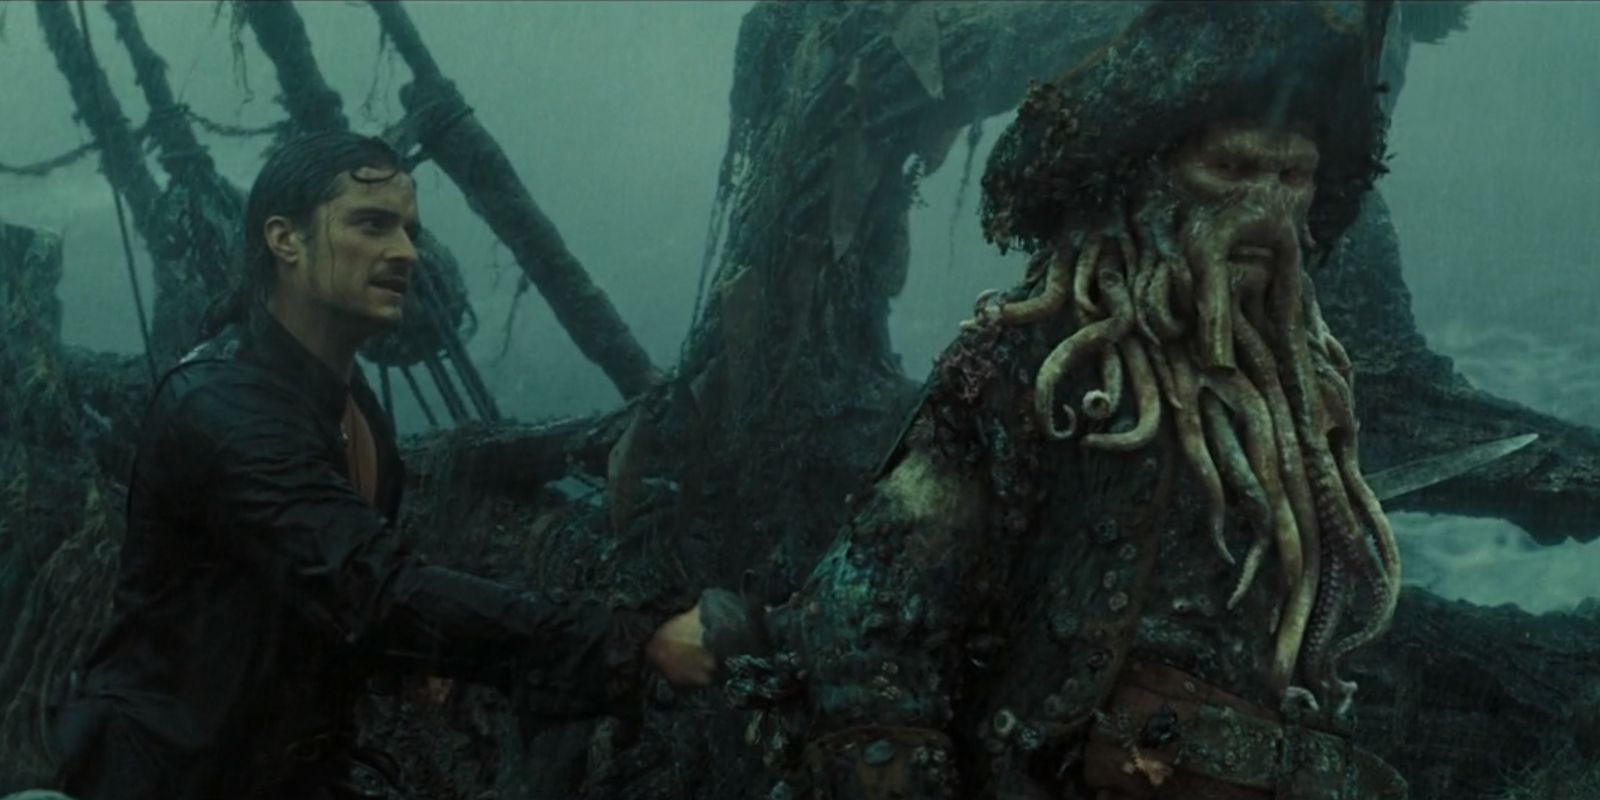 Will Turner stabbing Davy Jones in Pirates Of The Caribbean At Worlds End